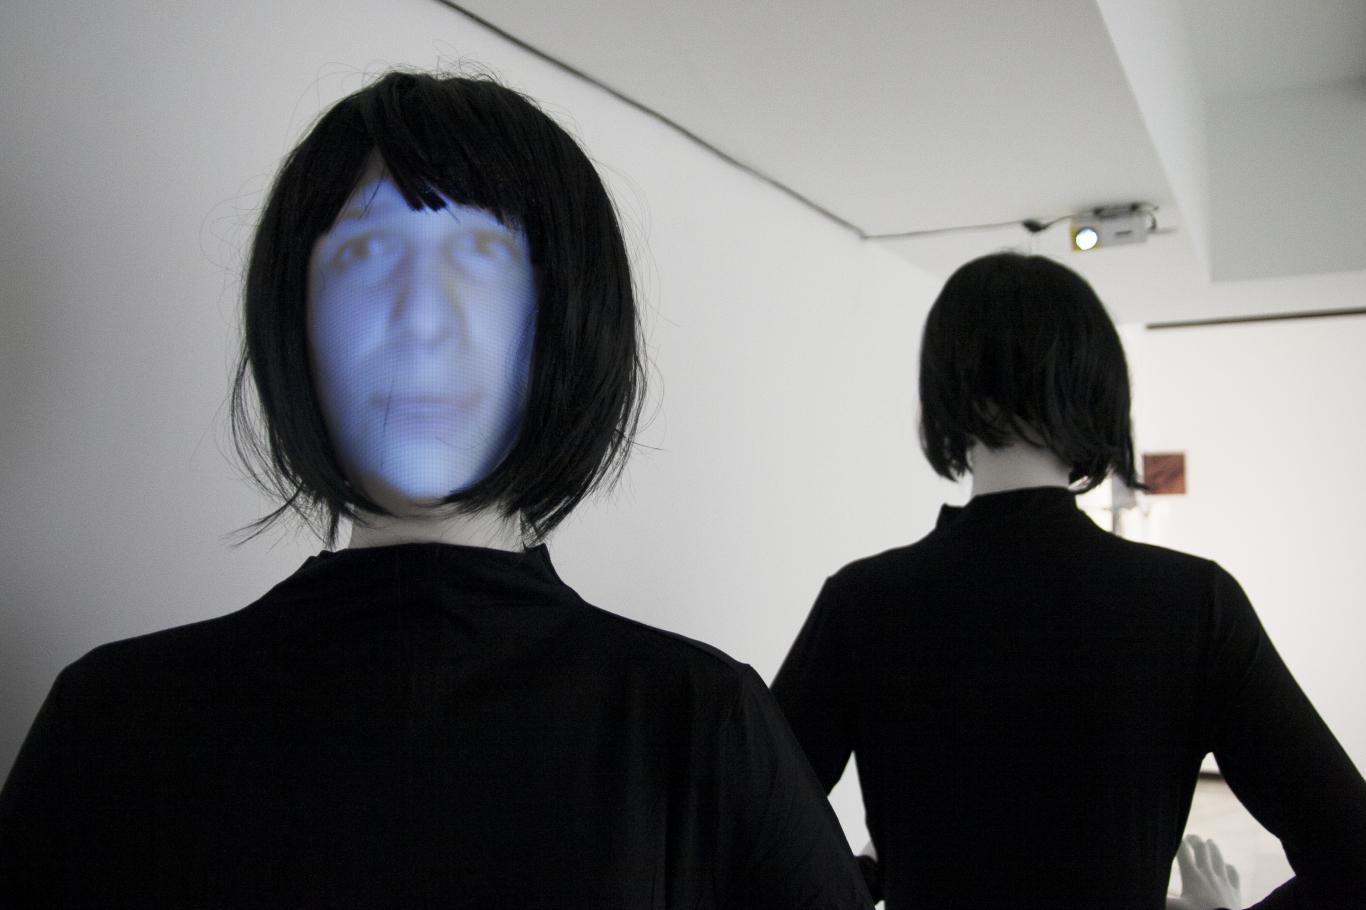 Two mannequins with black wigs and face projections on their faces